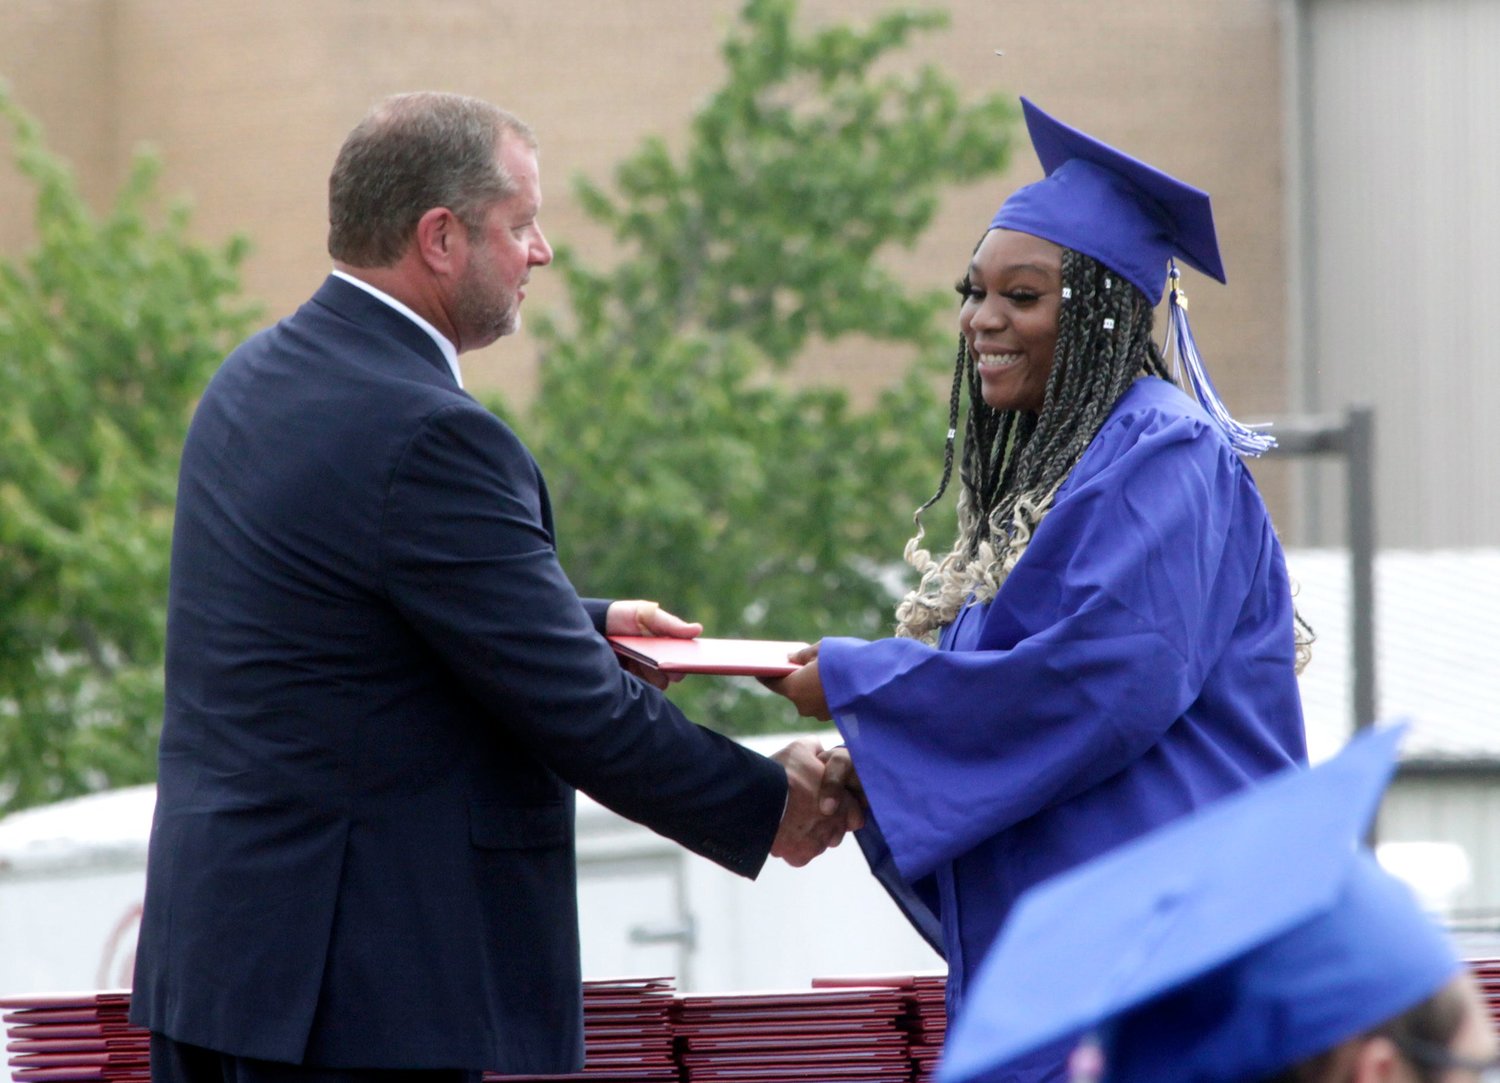 Moberly senior Whitney Sharé Jones receives her diploma from Moberly Board of Education President Bobby Riley.